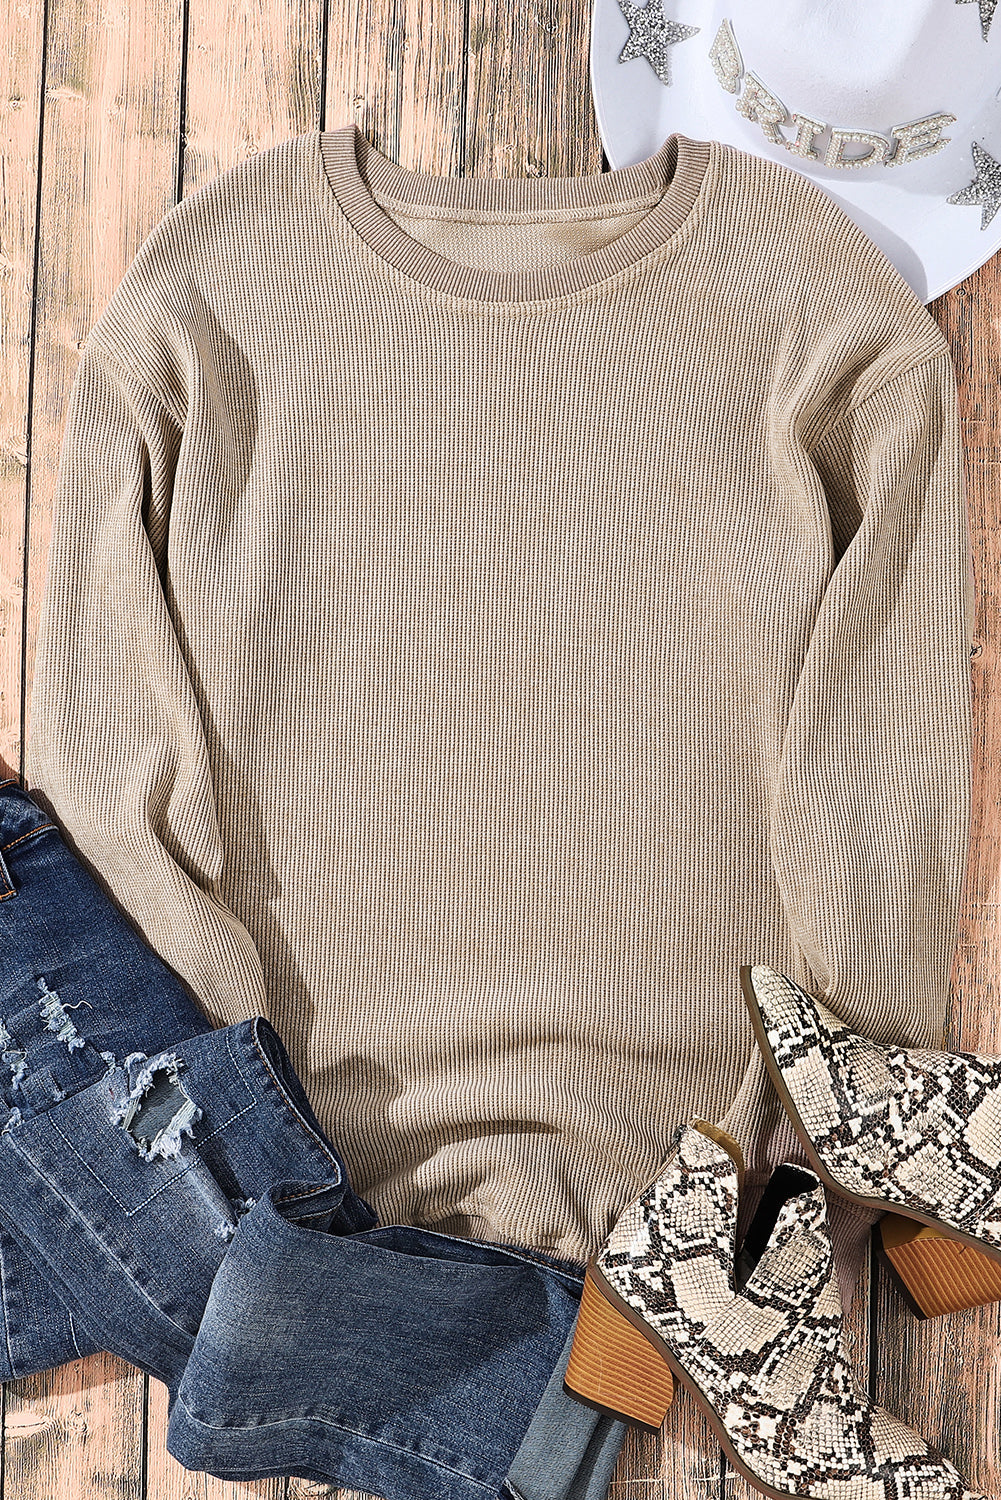 Black Solid Ribbed Knit Round Neck Pullover Sweatshirt